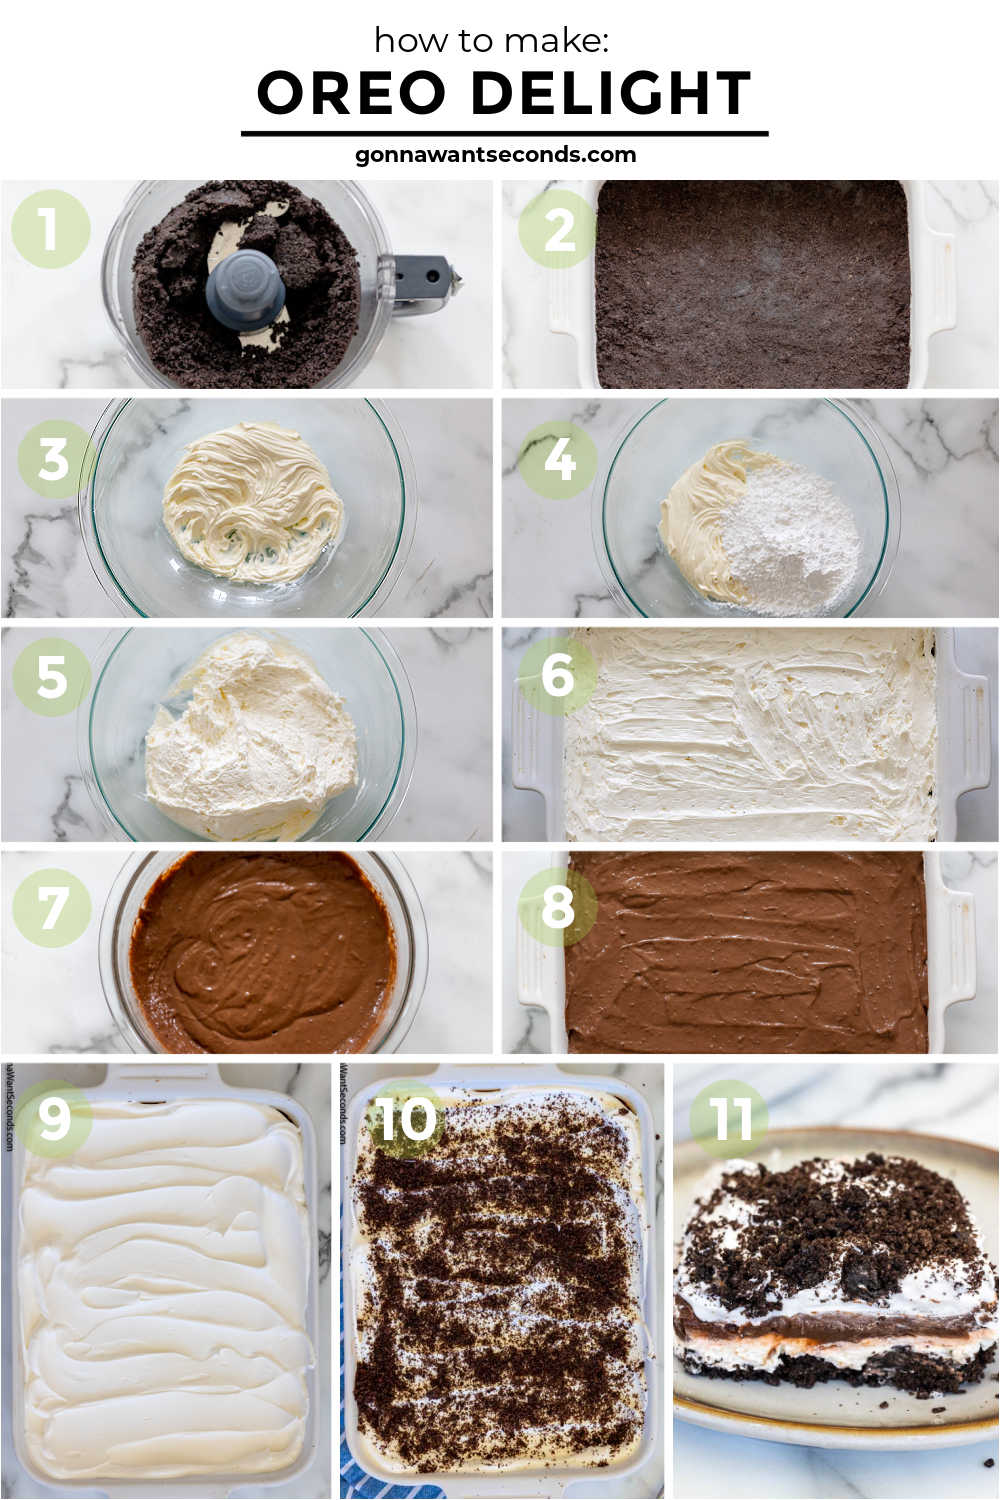 step by step how to oreo delight